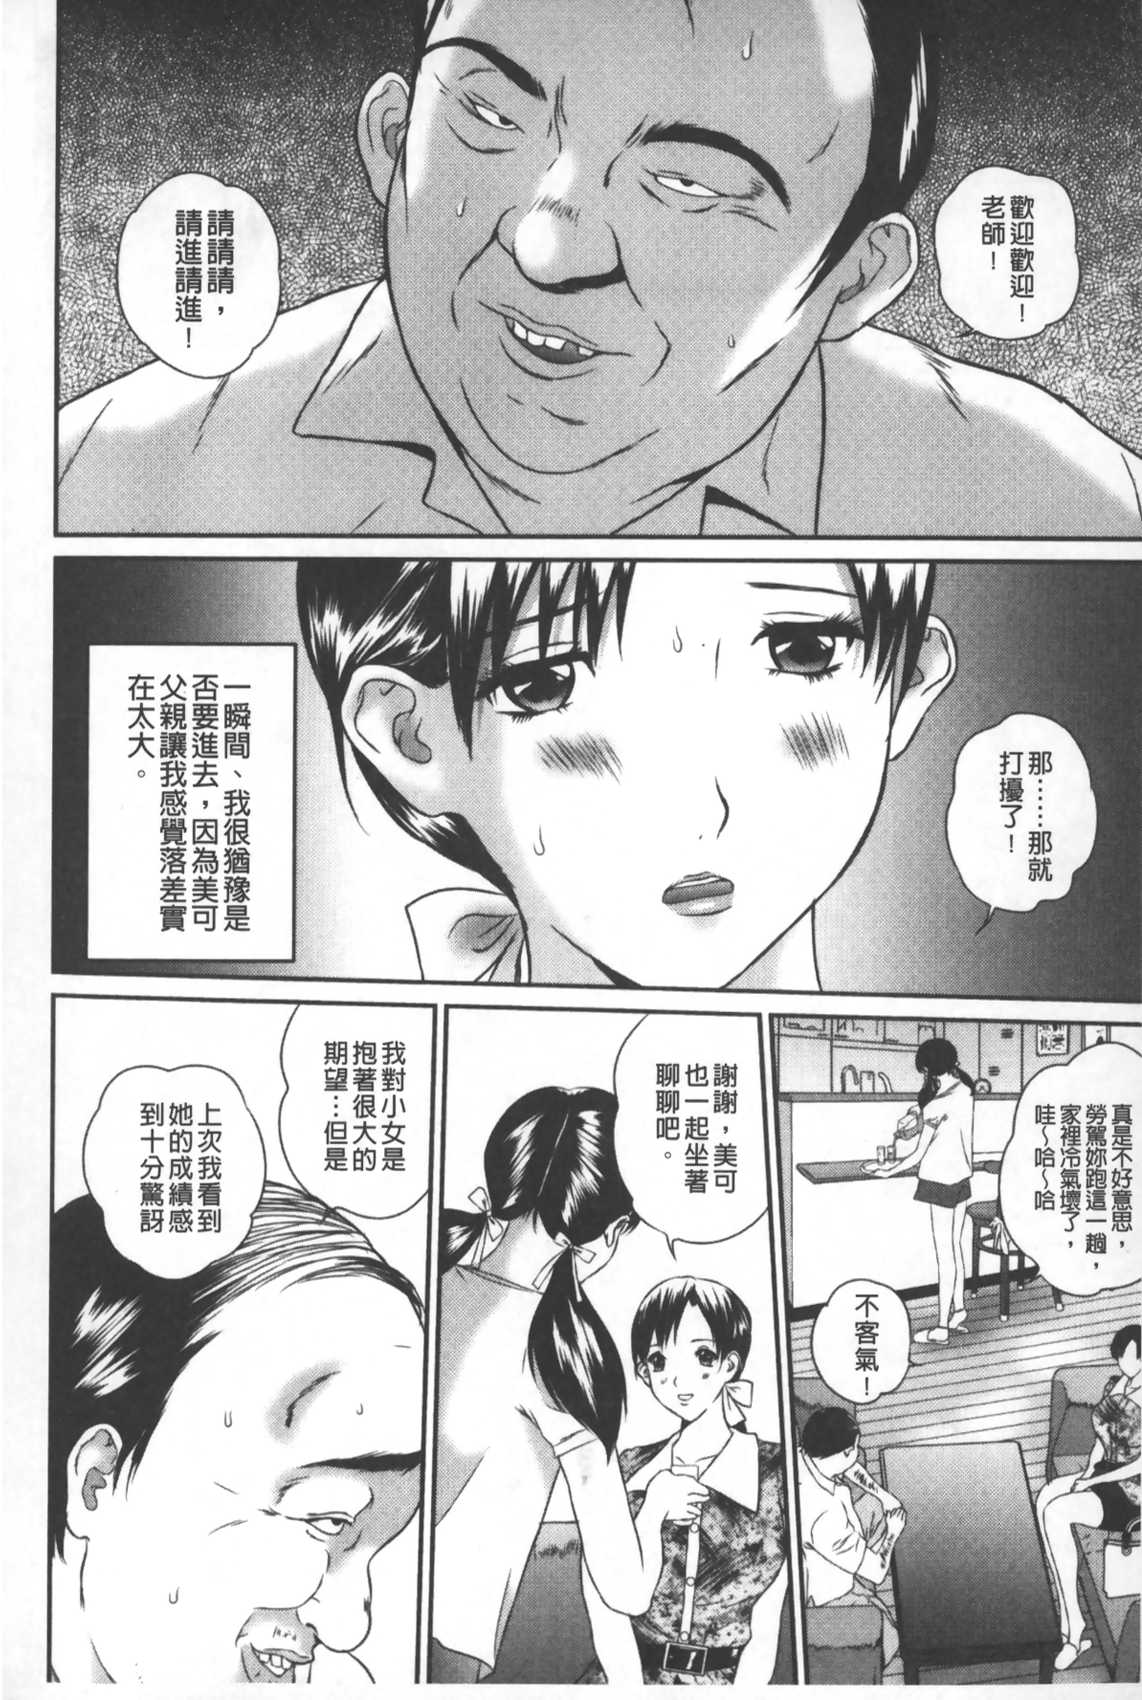 [Manzou] Tousatsu Collector | 盜拍題材精選集 [Chinese] page 45 full